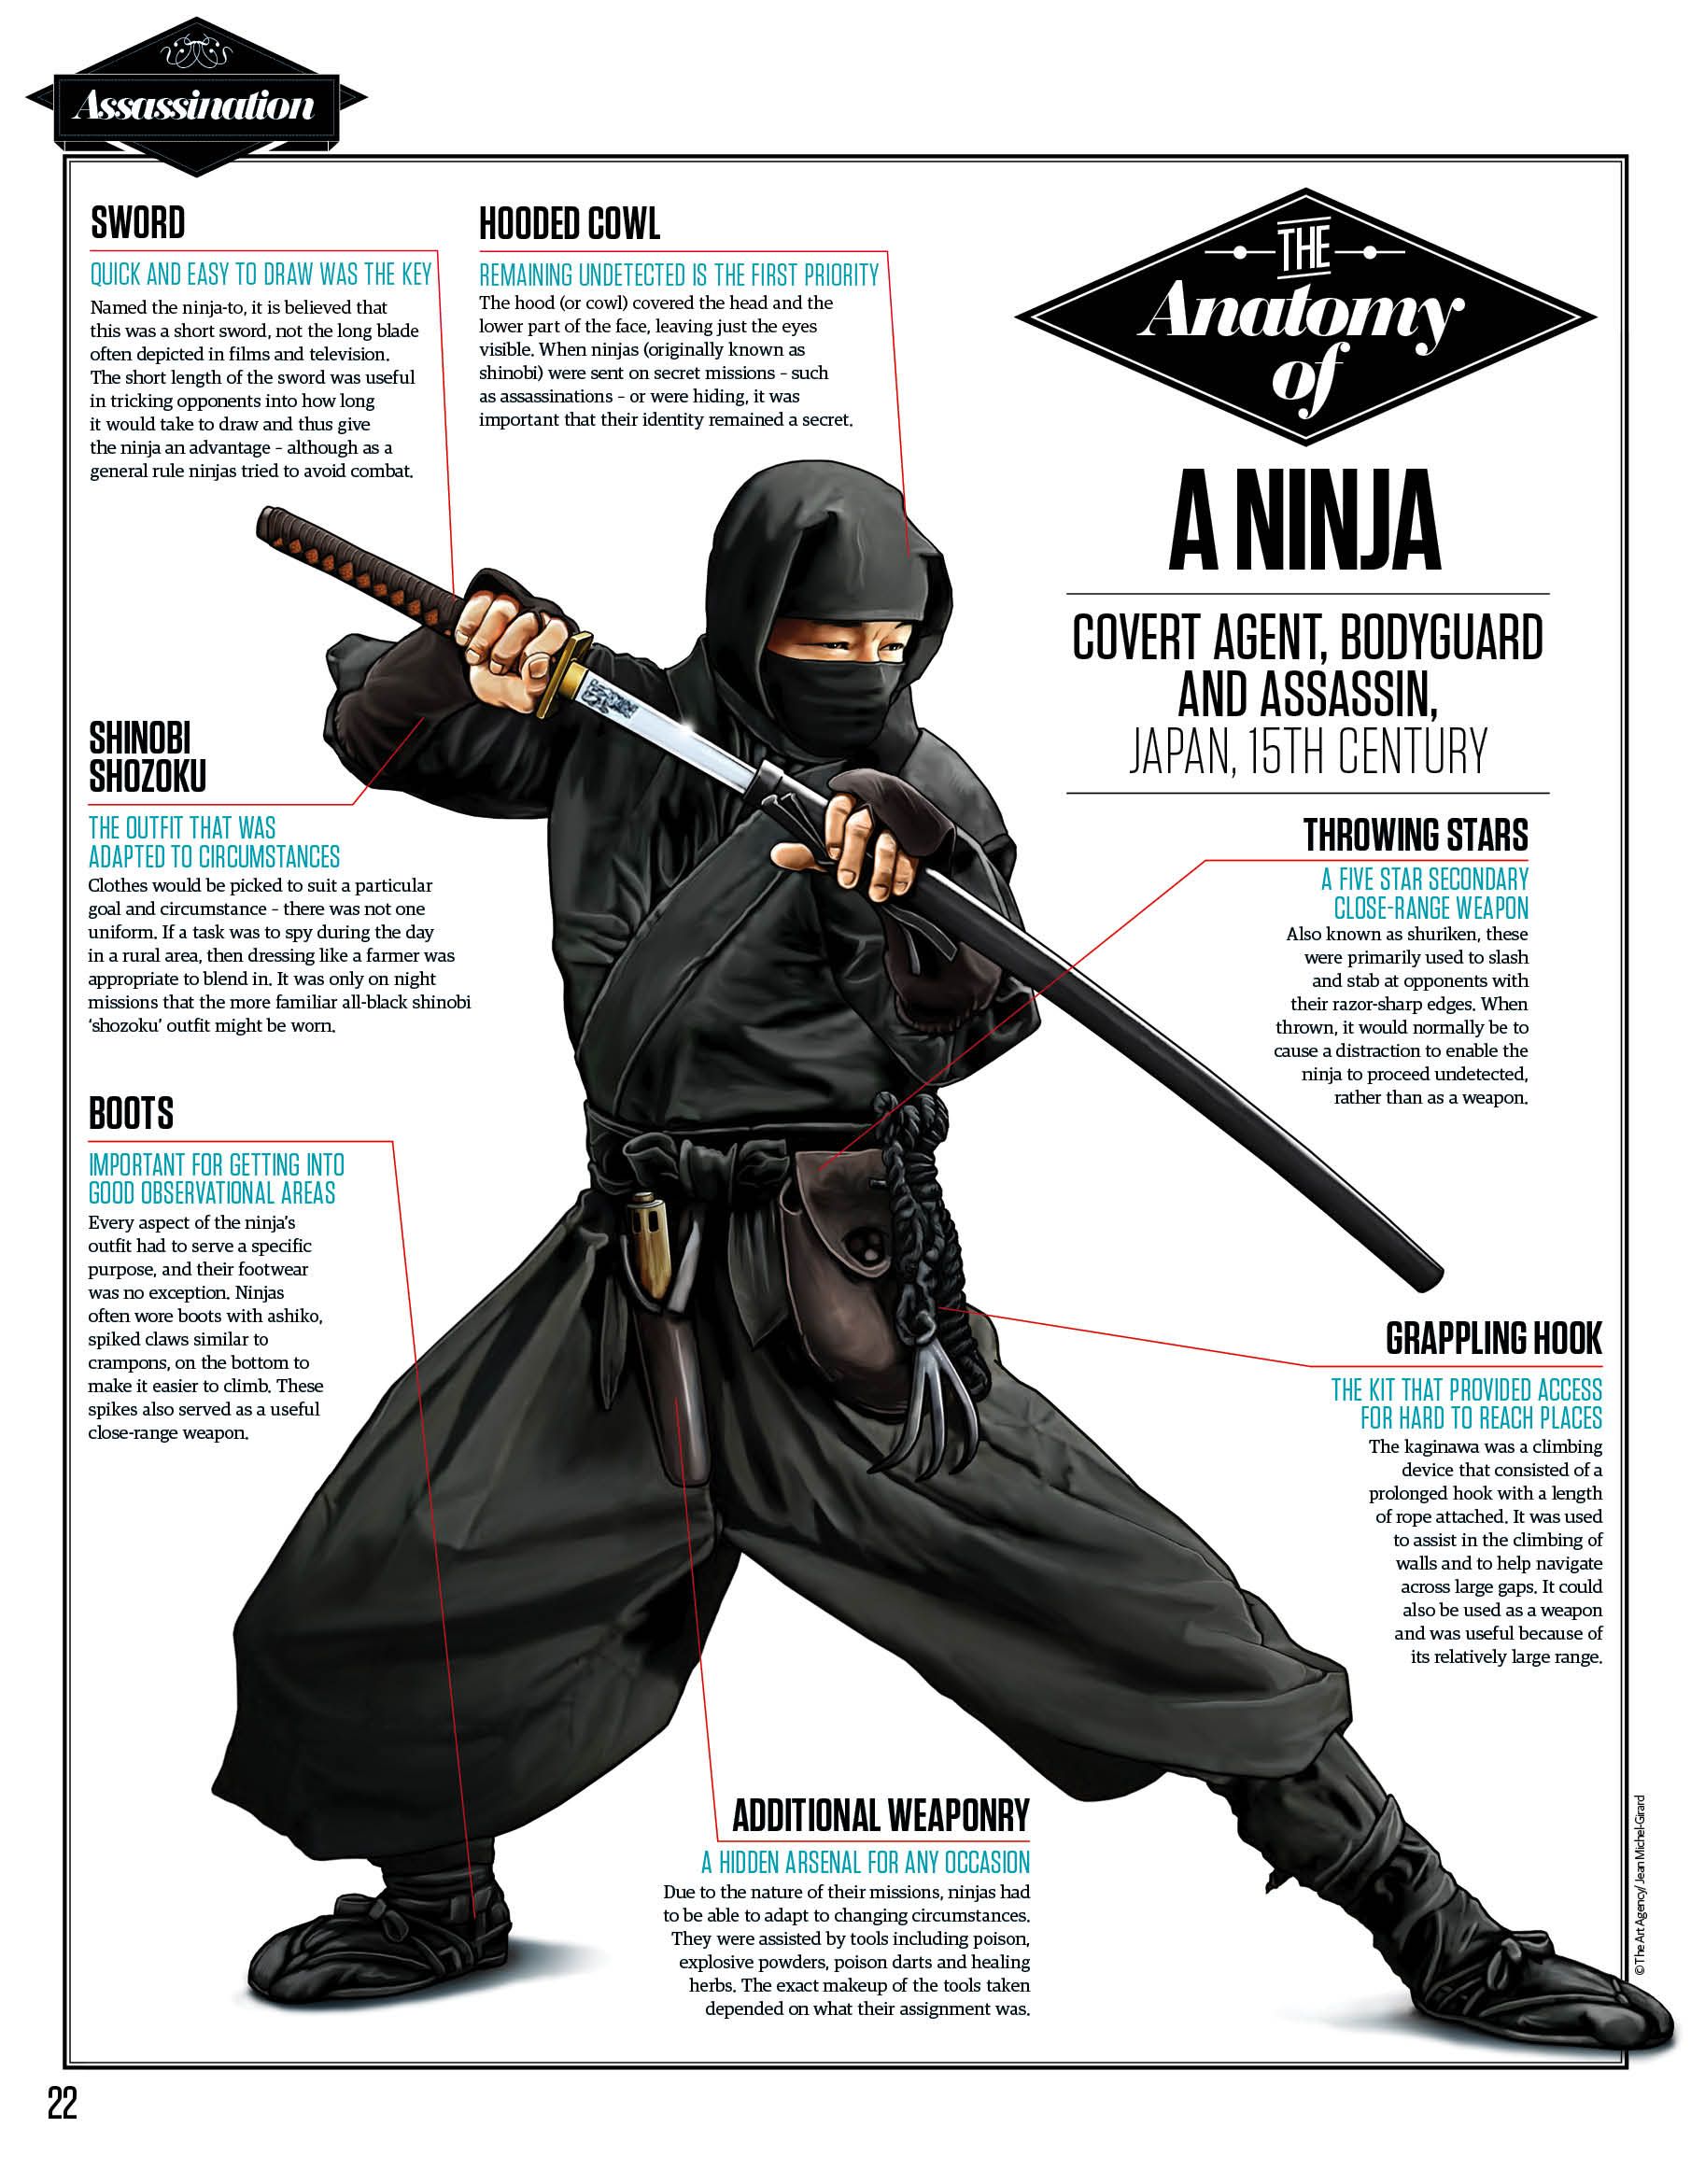 traditional ninja outfit - Google Search | Star wars | Pinterest ...